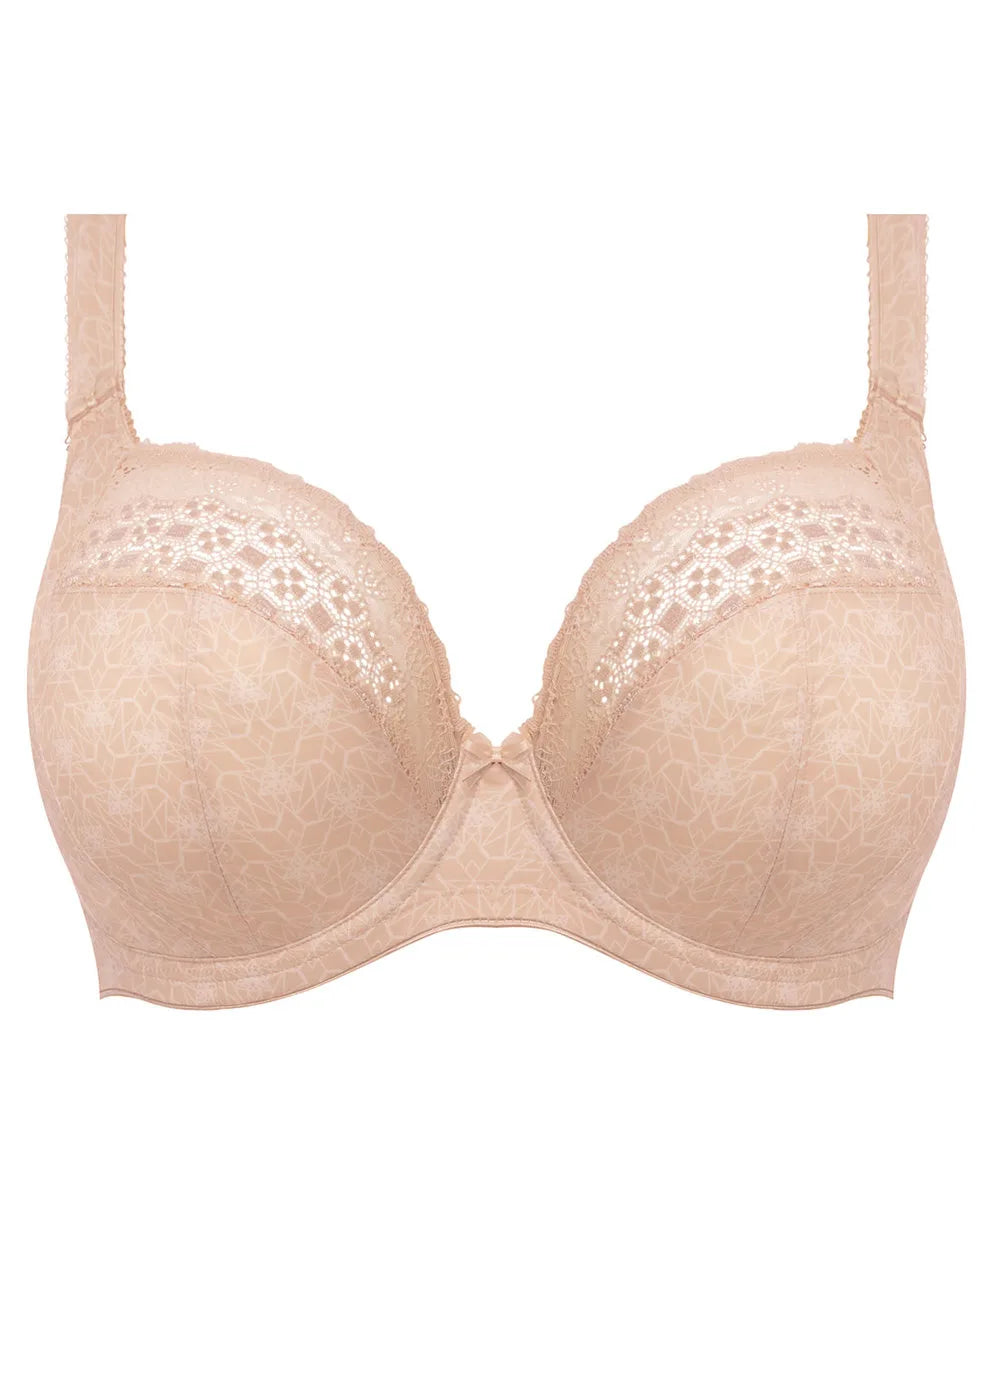 KIM Stretch Plunge Bra from Elomi at Belle Lacet Lingerie